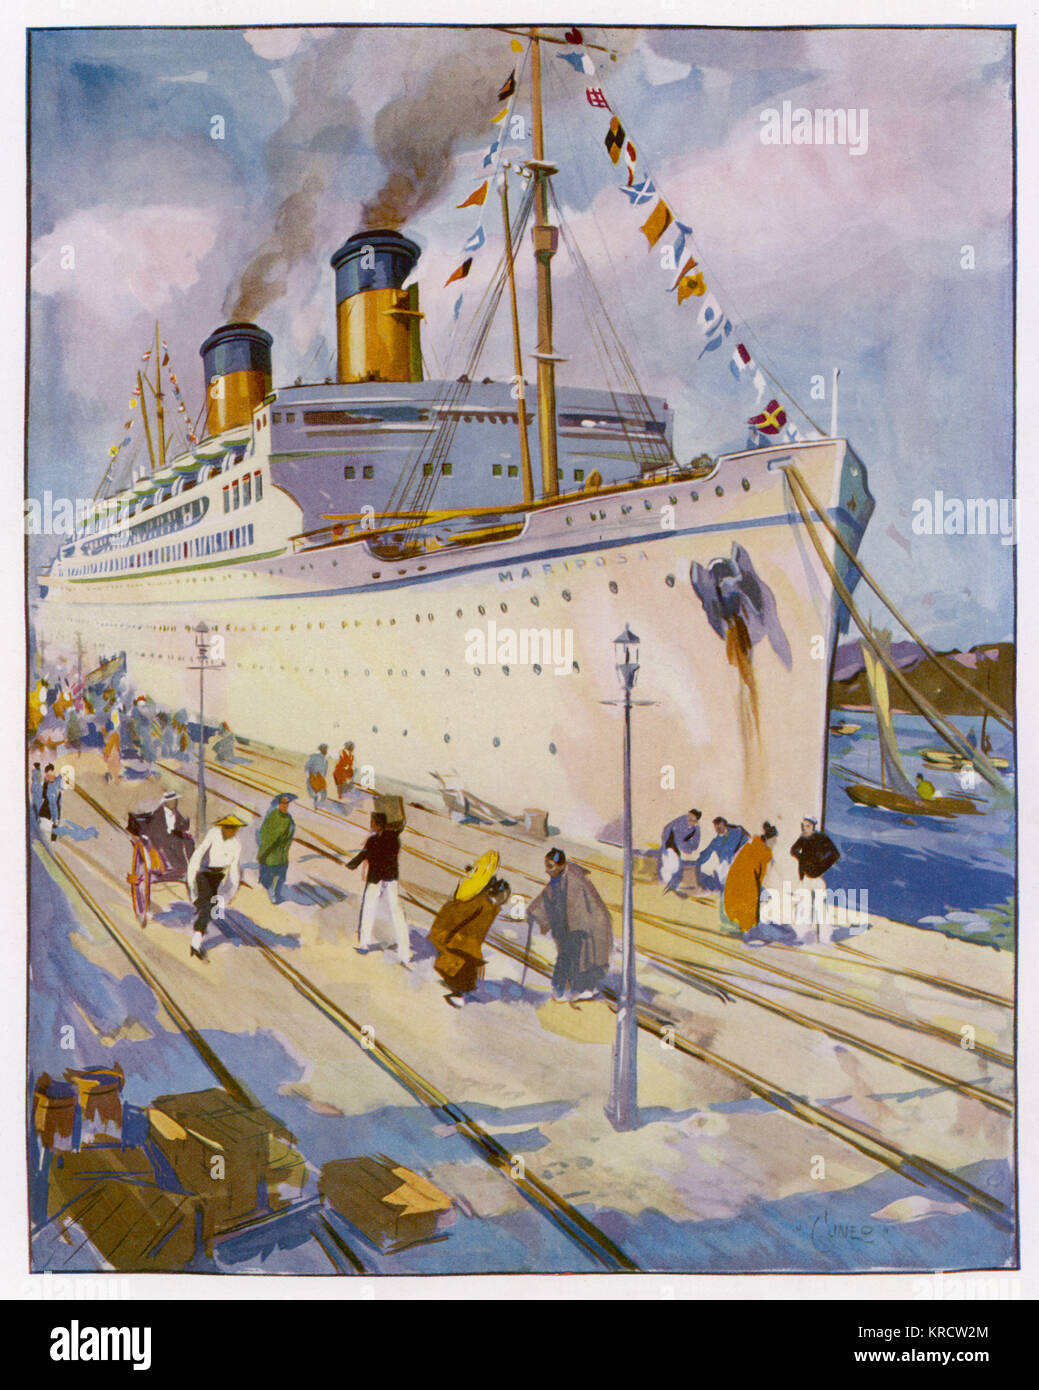 The Matson-Oceanic trans- Pacific liner. Later sold and renamed S.S. Homeric. Damaged in a fire at sea in 1973, scrapped the following year. Date: Launched 1931 Stock Photo